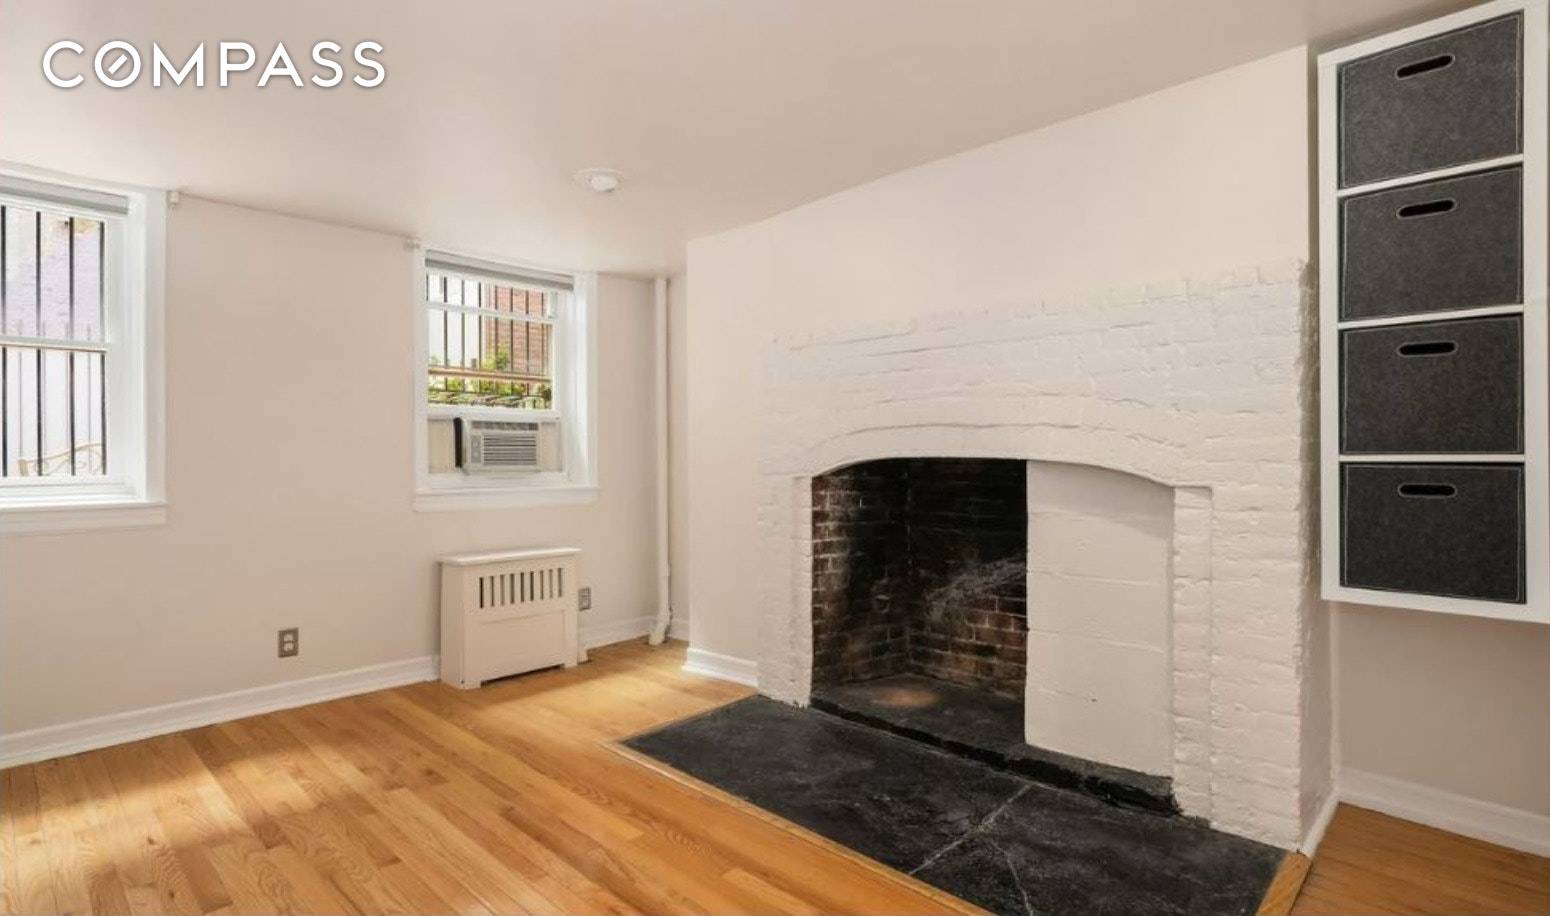 Located on one of the most picturesque streets in Greenwich Village, Minetta Lane, hidden from the hustle and bustle of Manhattan, this is a lovely renovated one bedroom in a ...